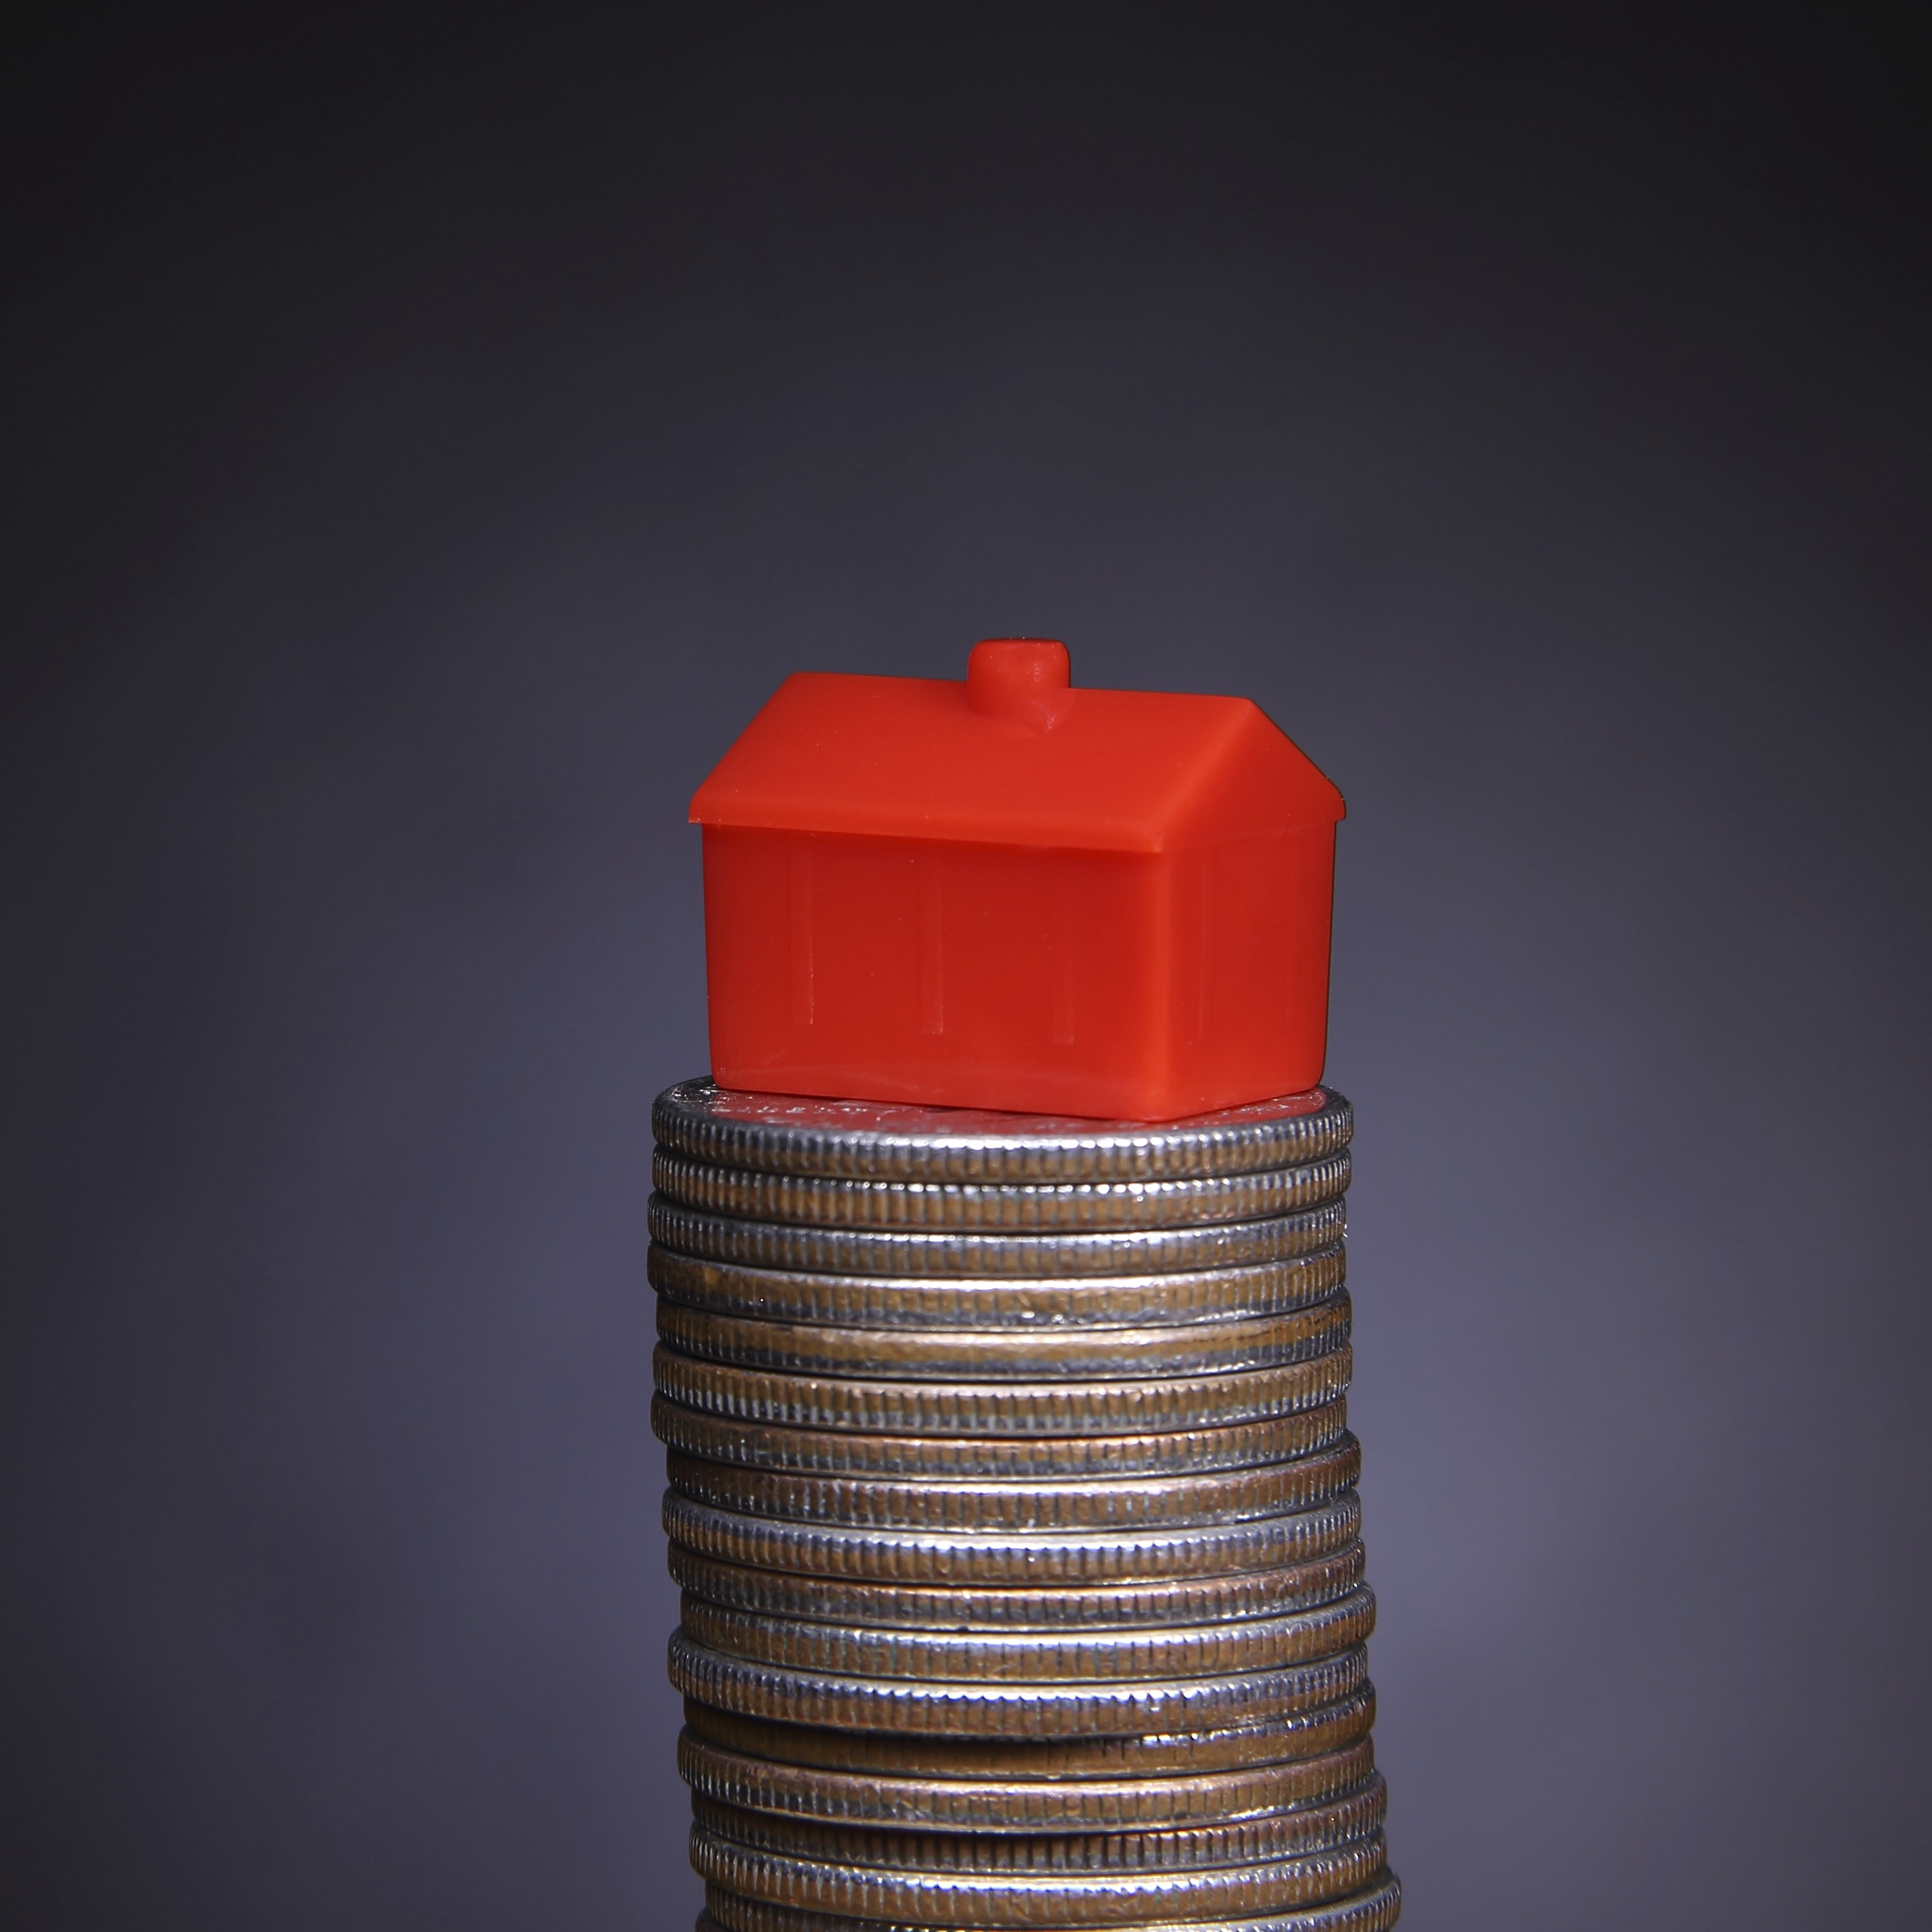 alt="house on stack of coins"